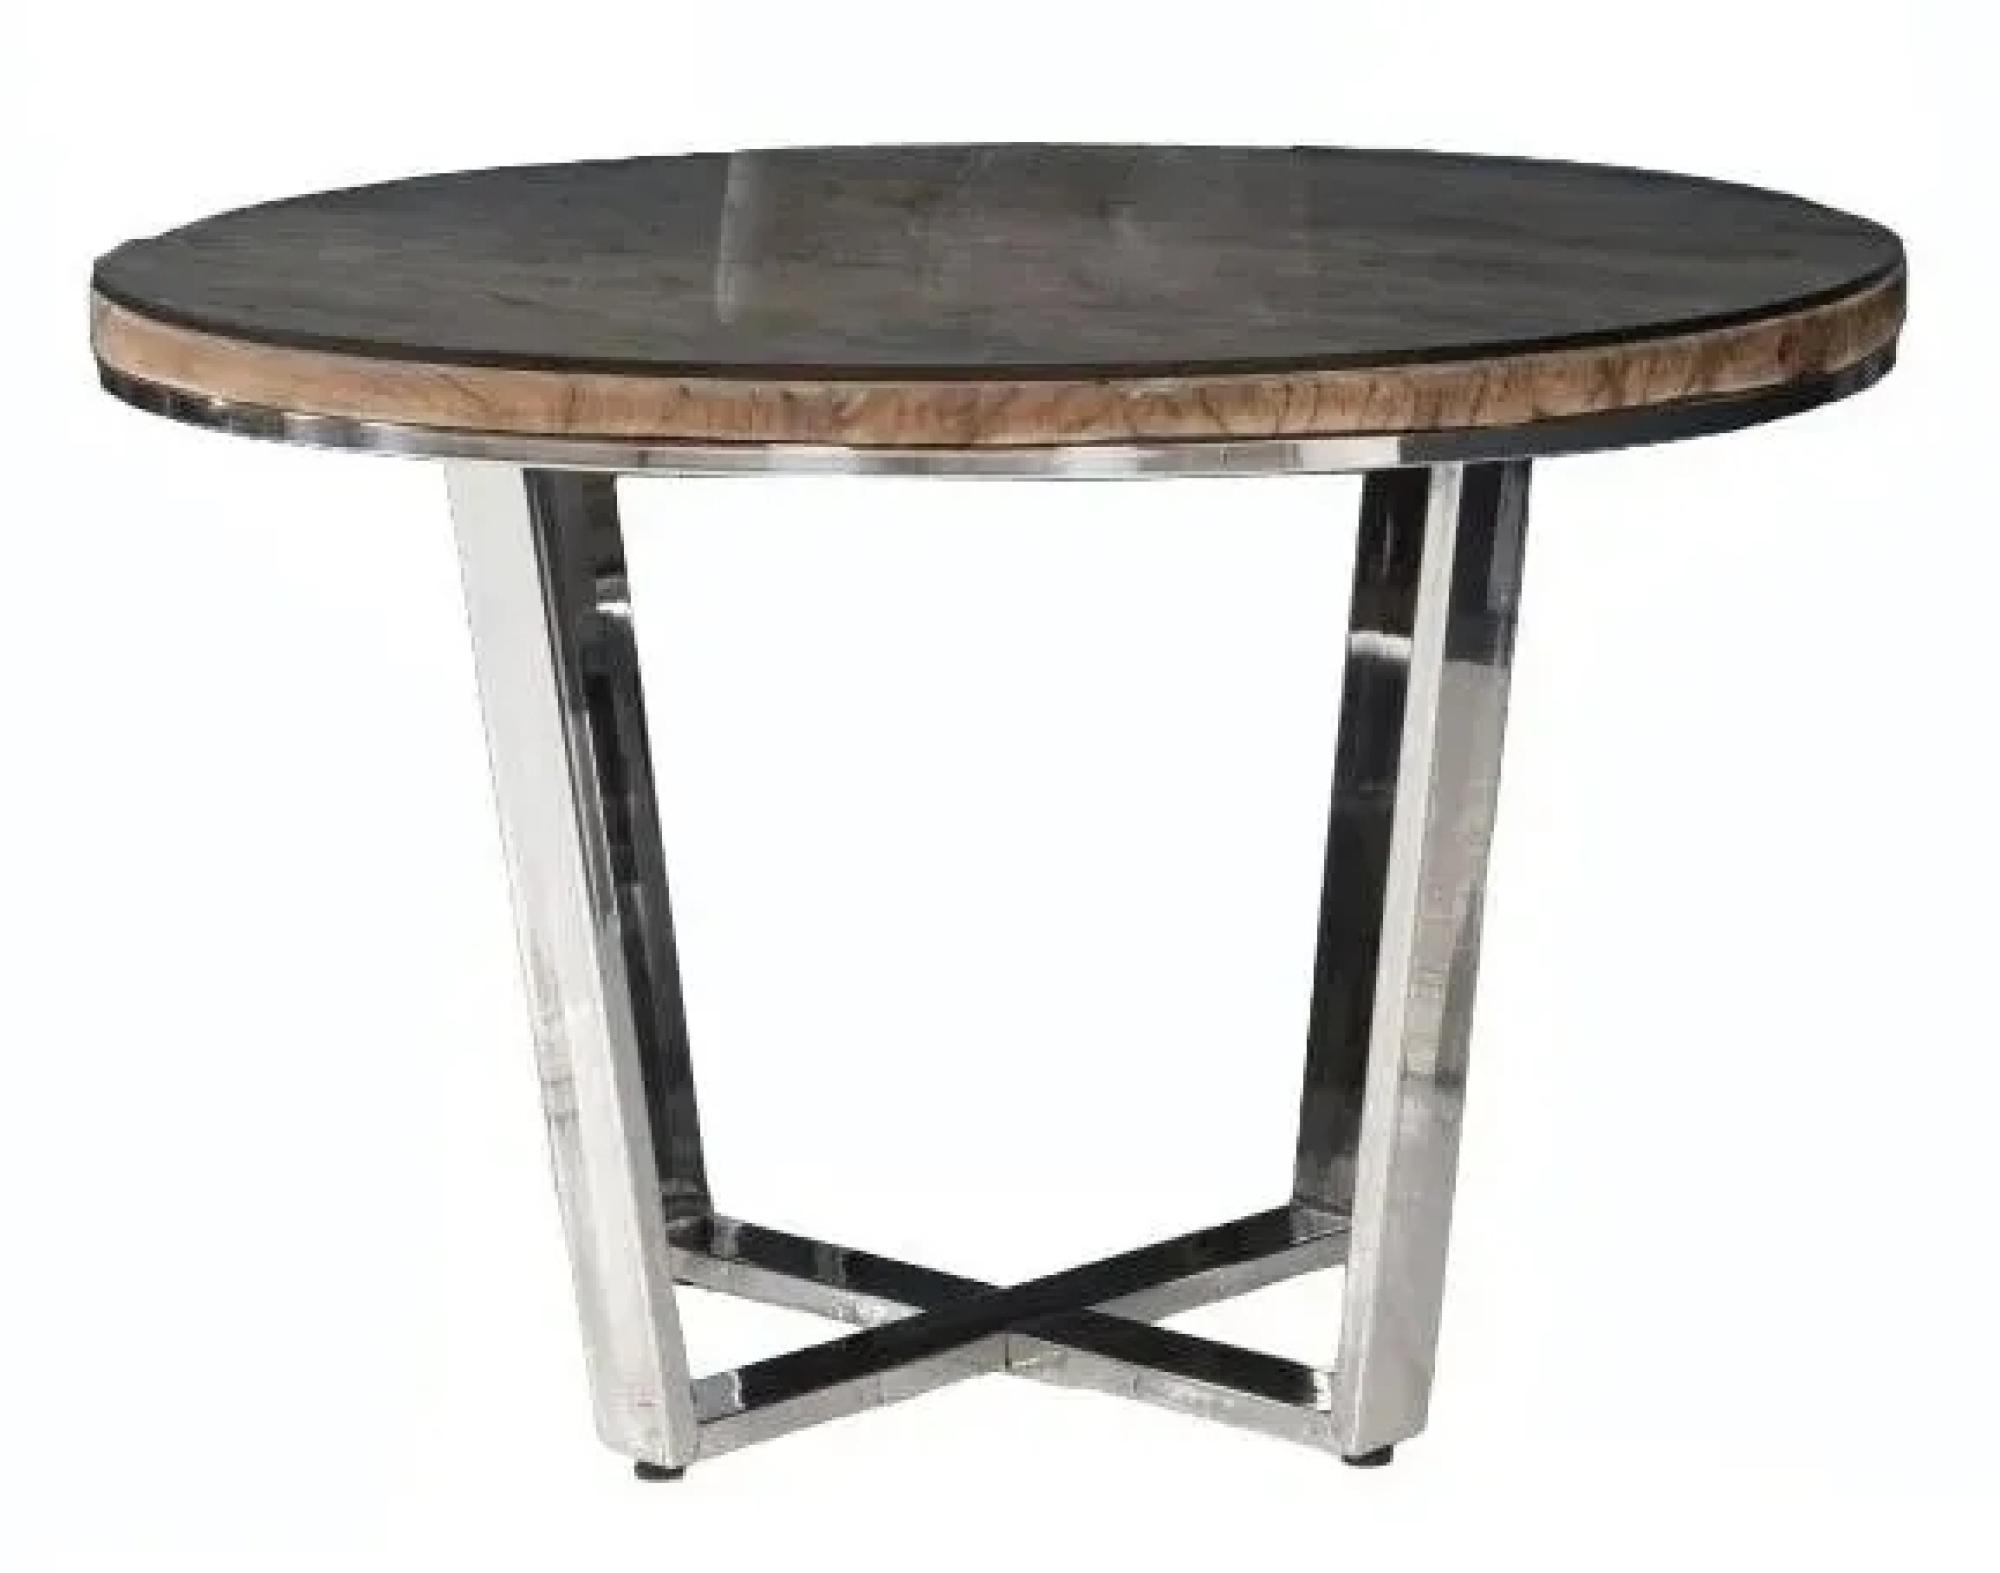 Railway Sleeper Dining Table with Glass Top, 120cm Round Seats 4 Diners with Stainless Steel Chrome Legs, Made from Reclaimed Wood